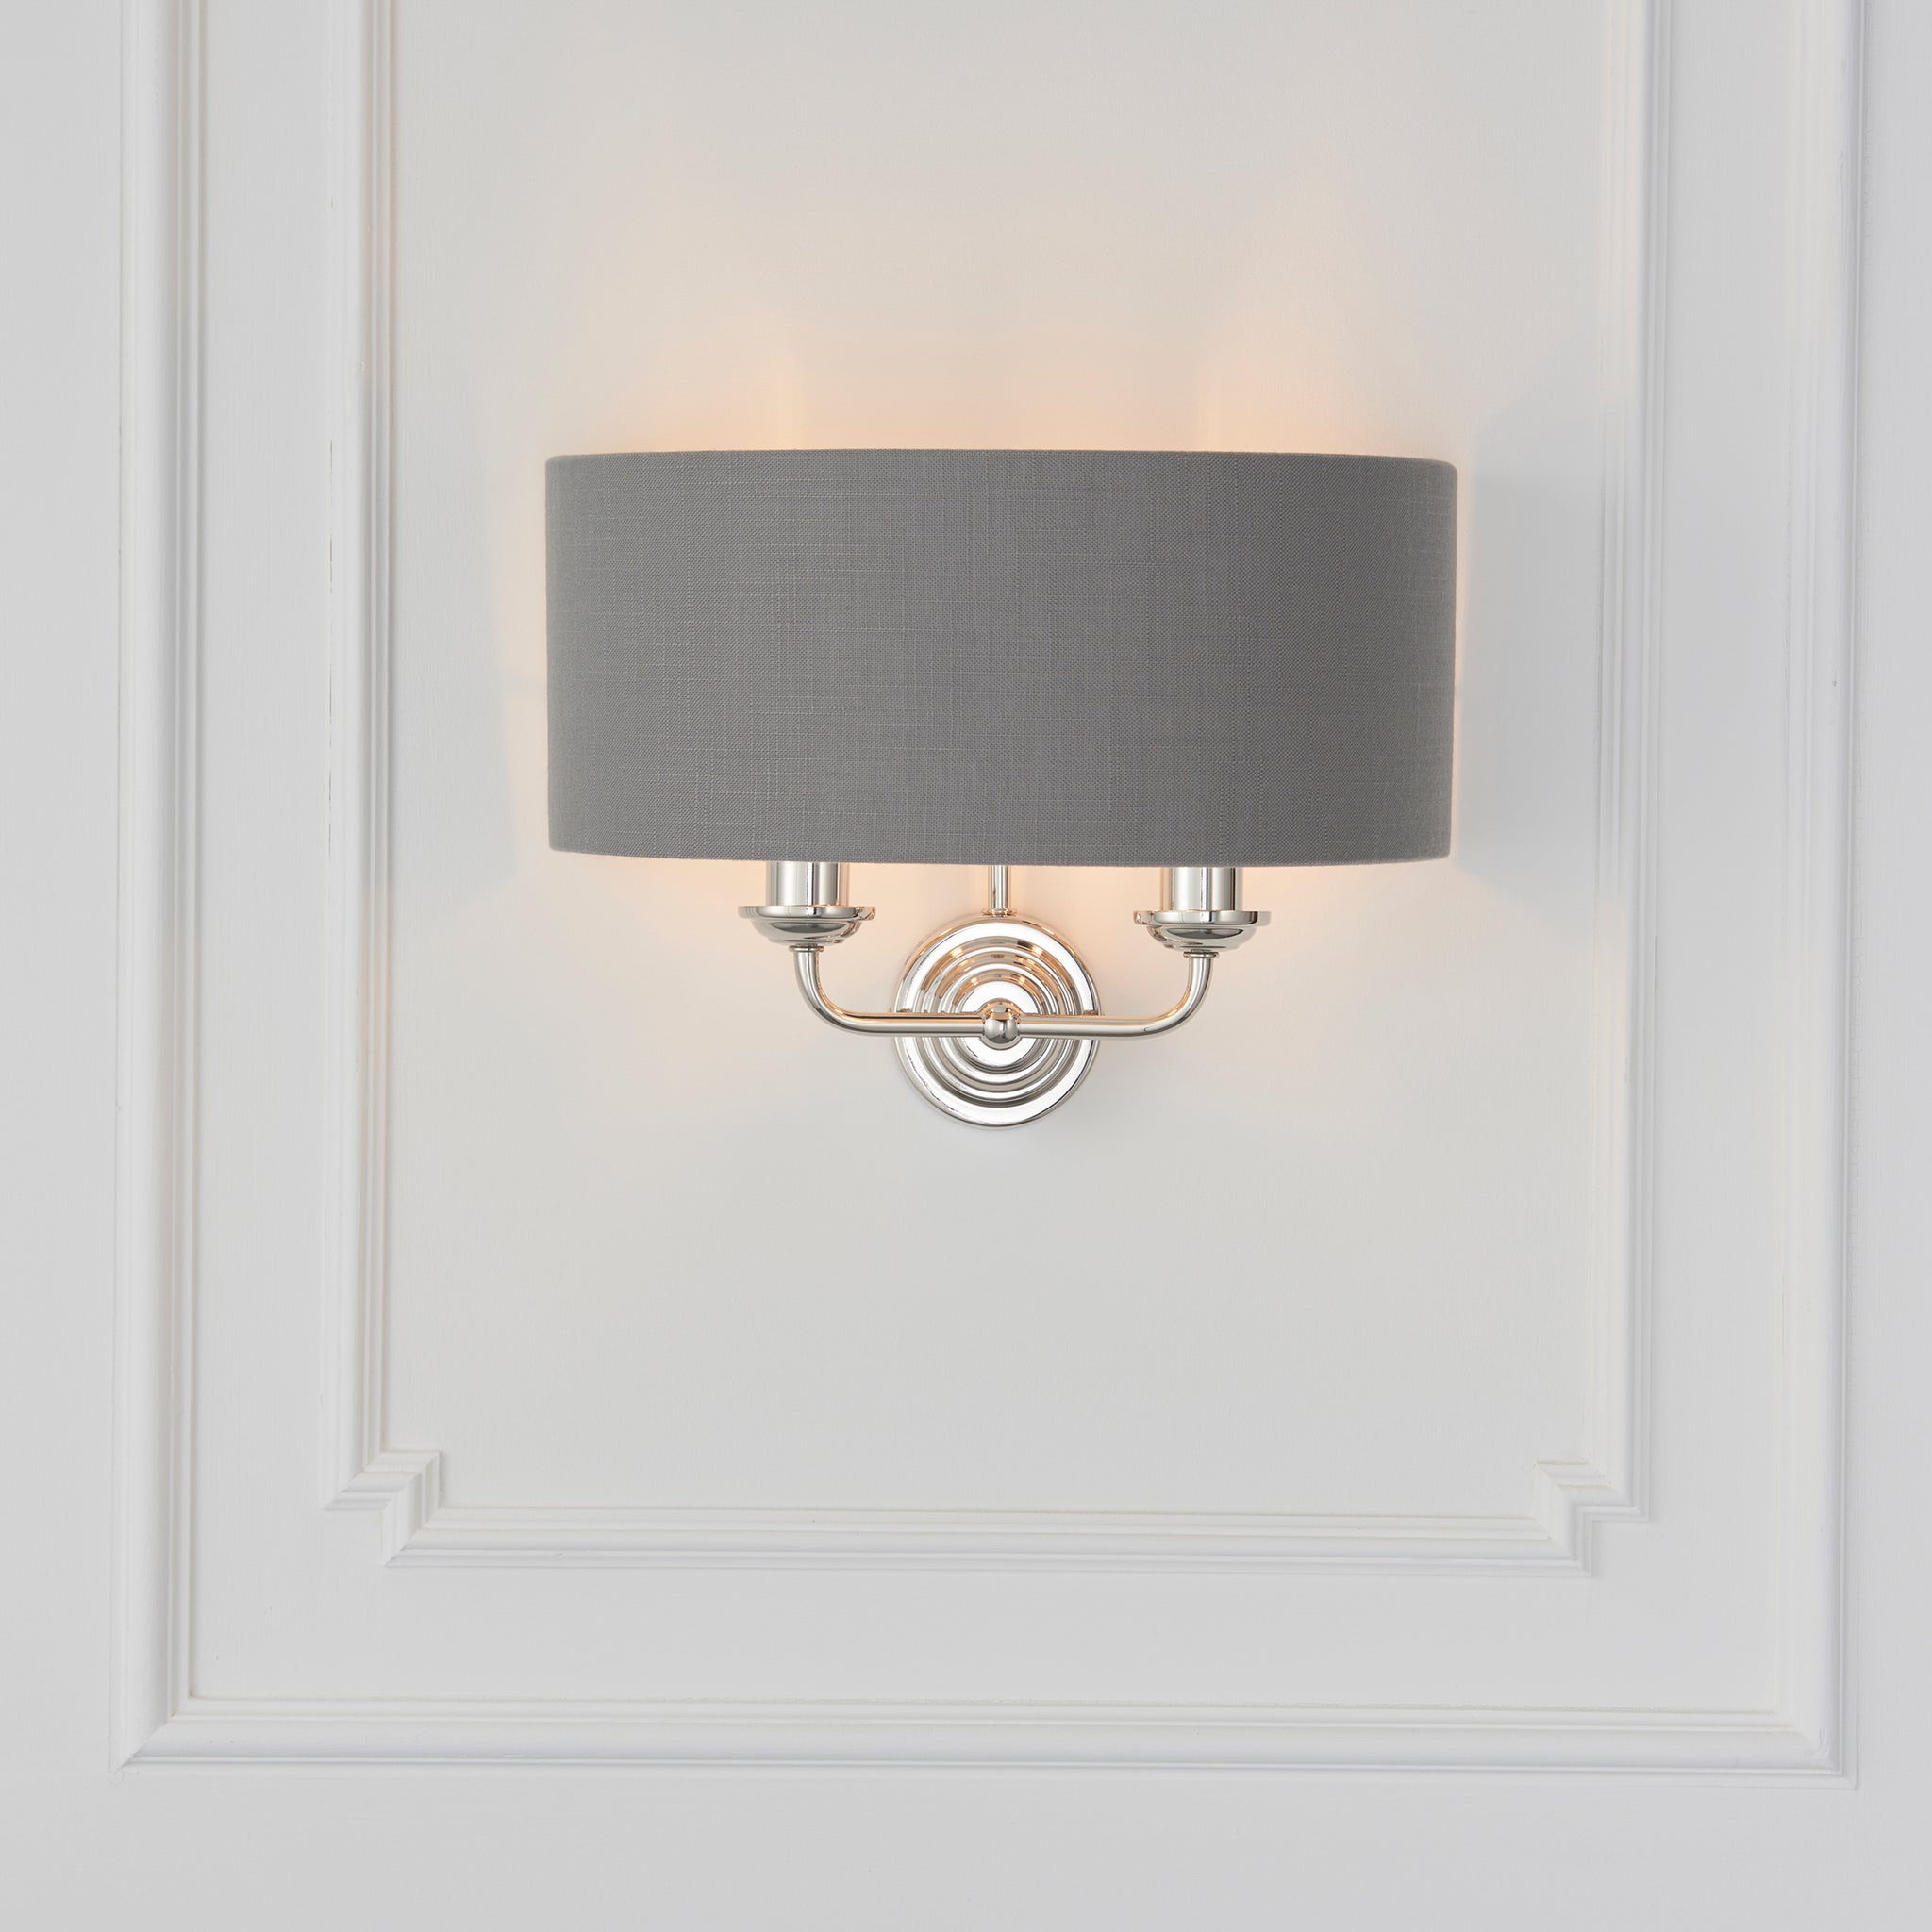 Moncler 2 Wall Light Nickel Charcoal